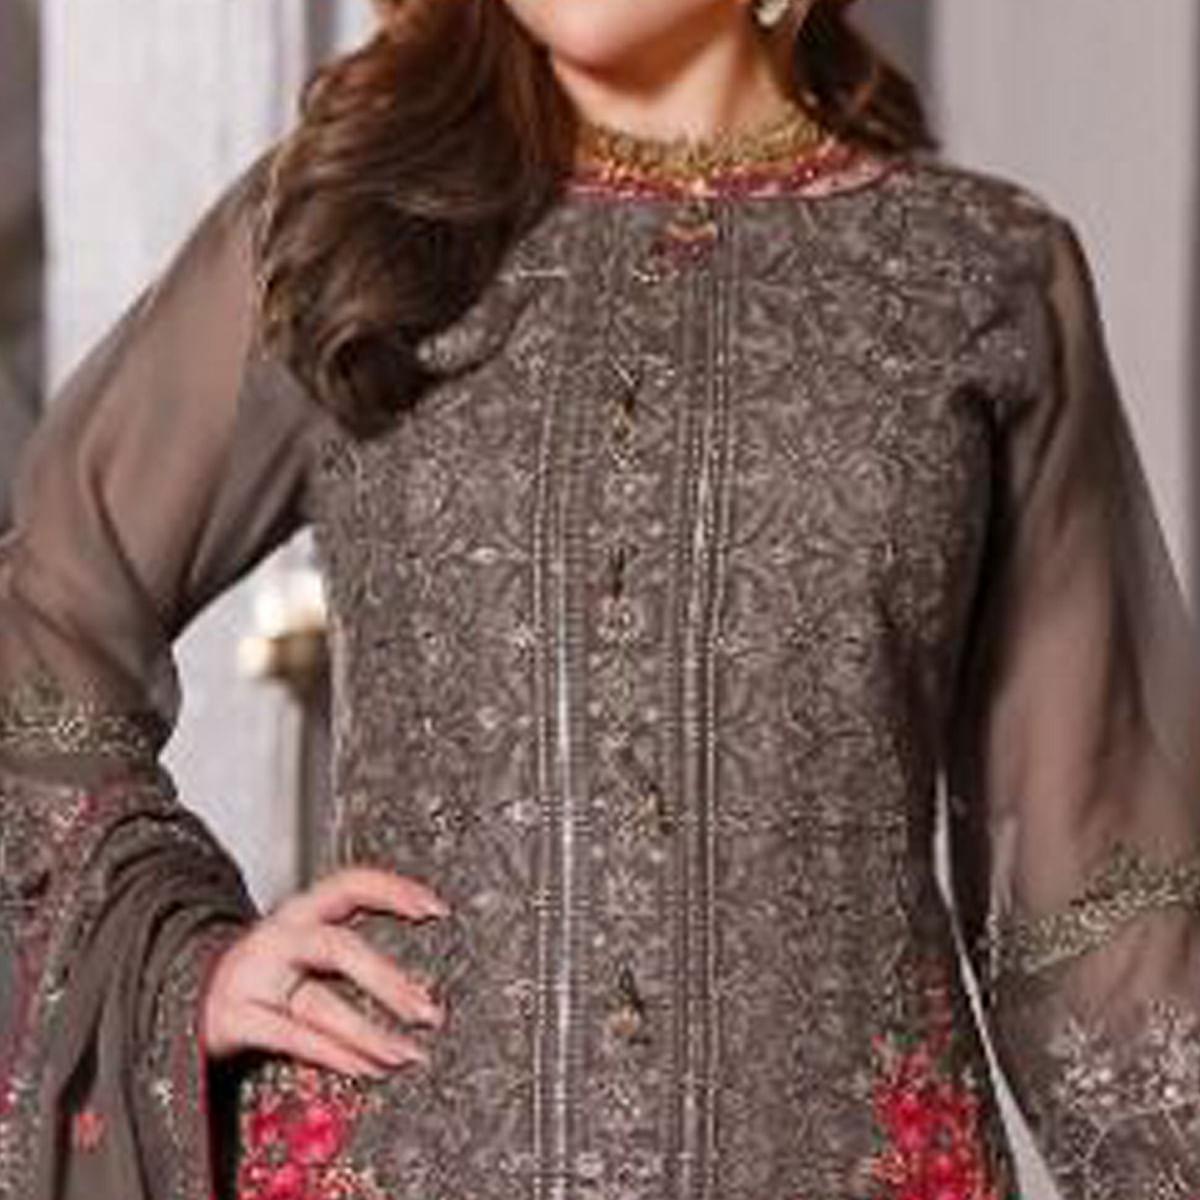 Brown Partywear Embroidered Georgette Pakistani Suit - Peachmode